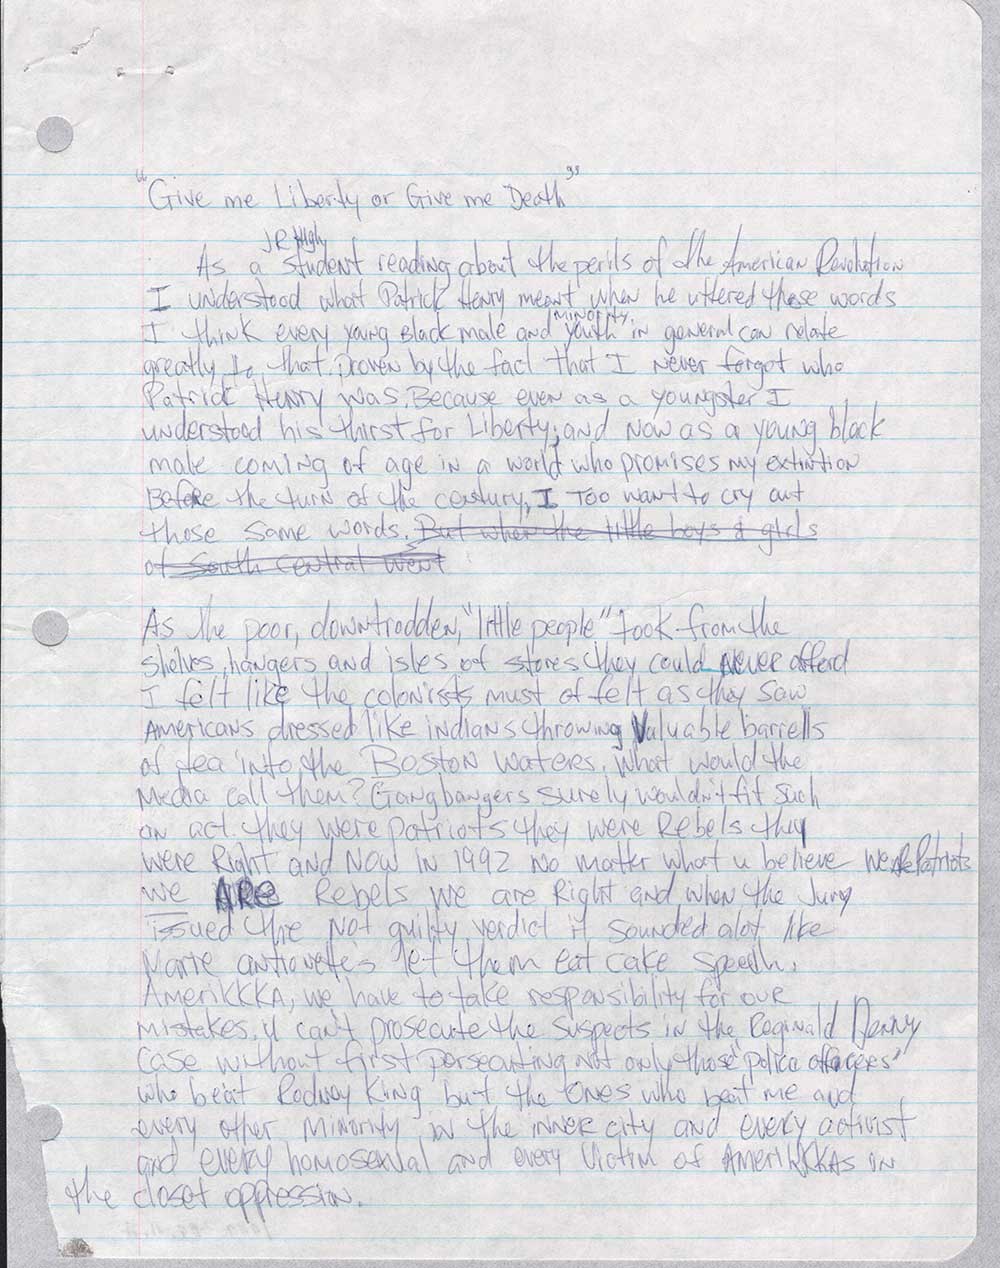 Tupac Essay: Give Me Liberty or Give Me Death